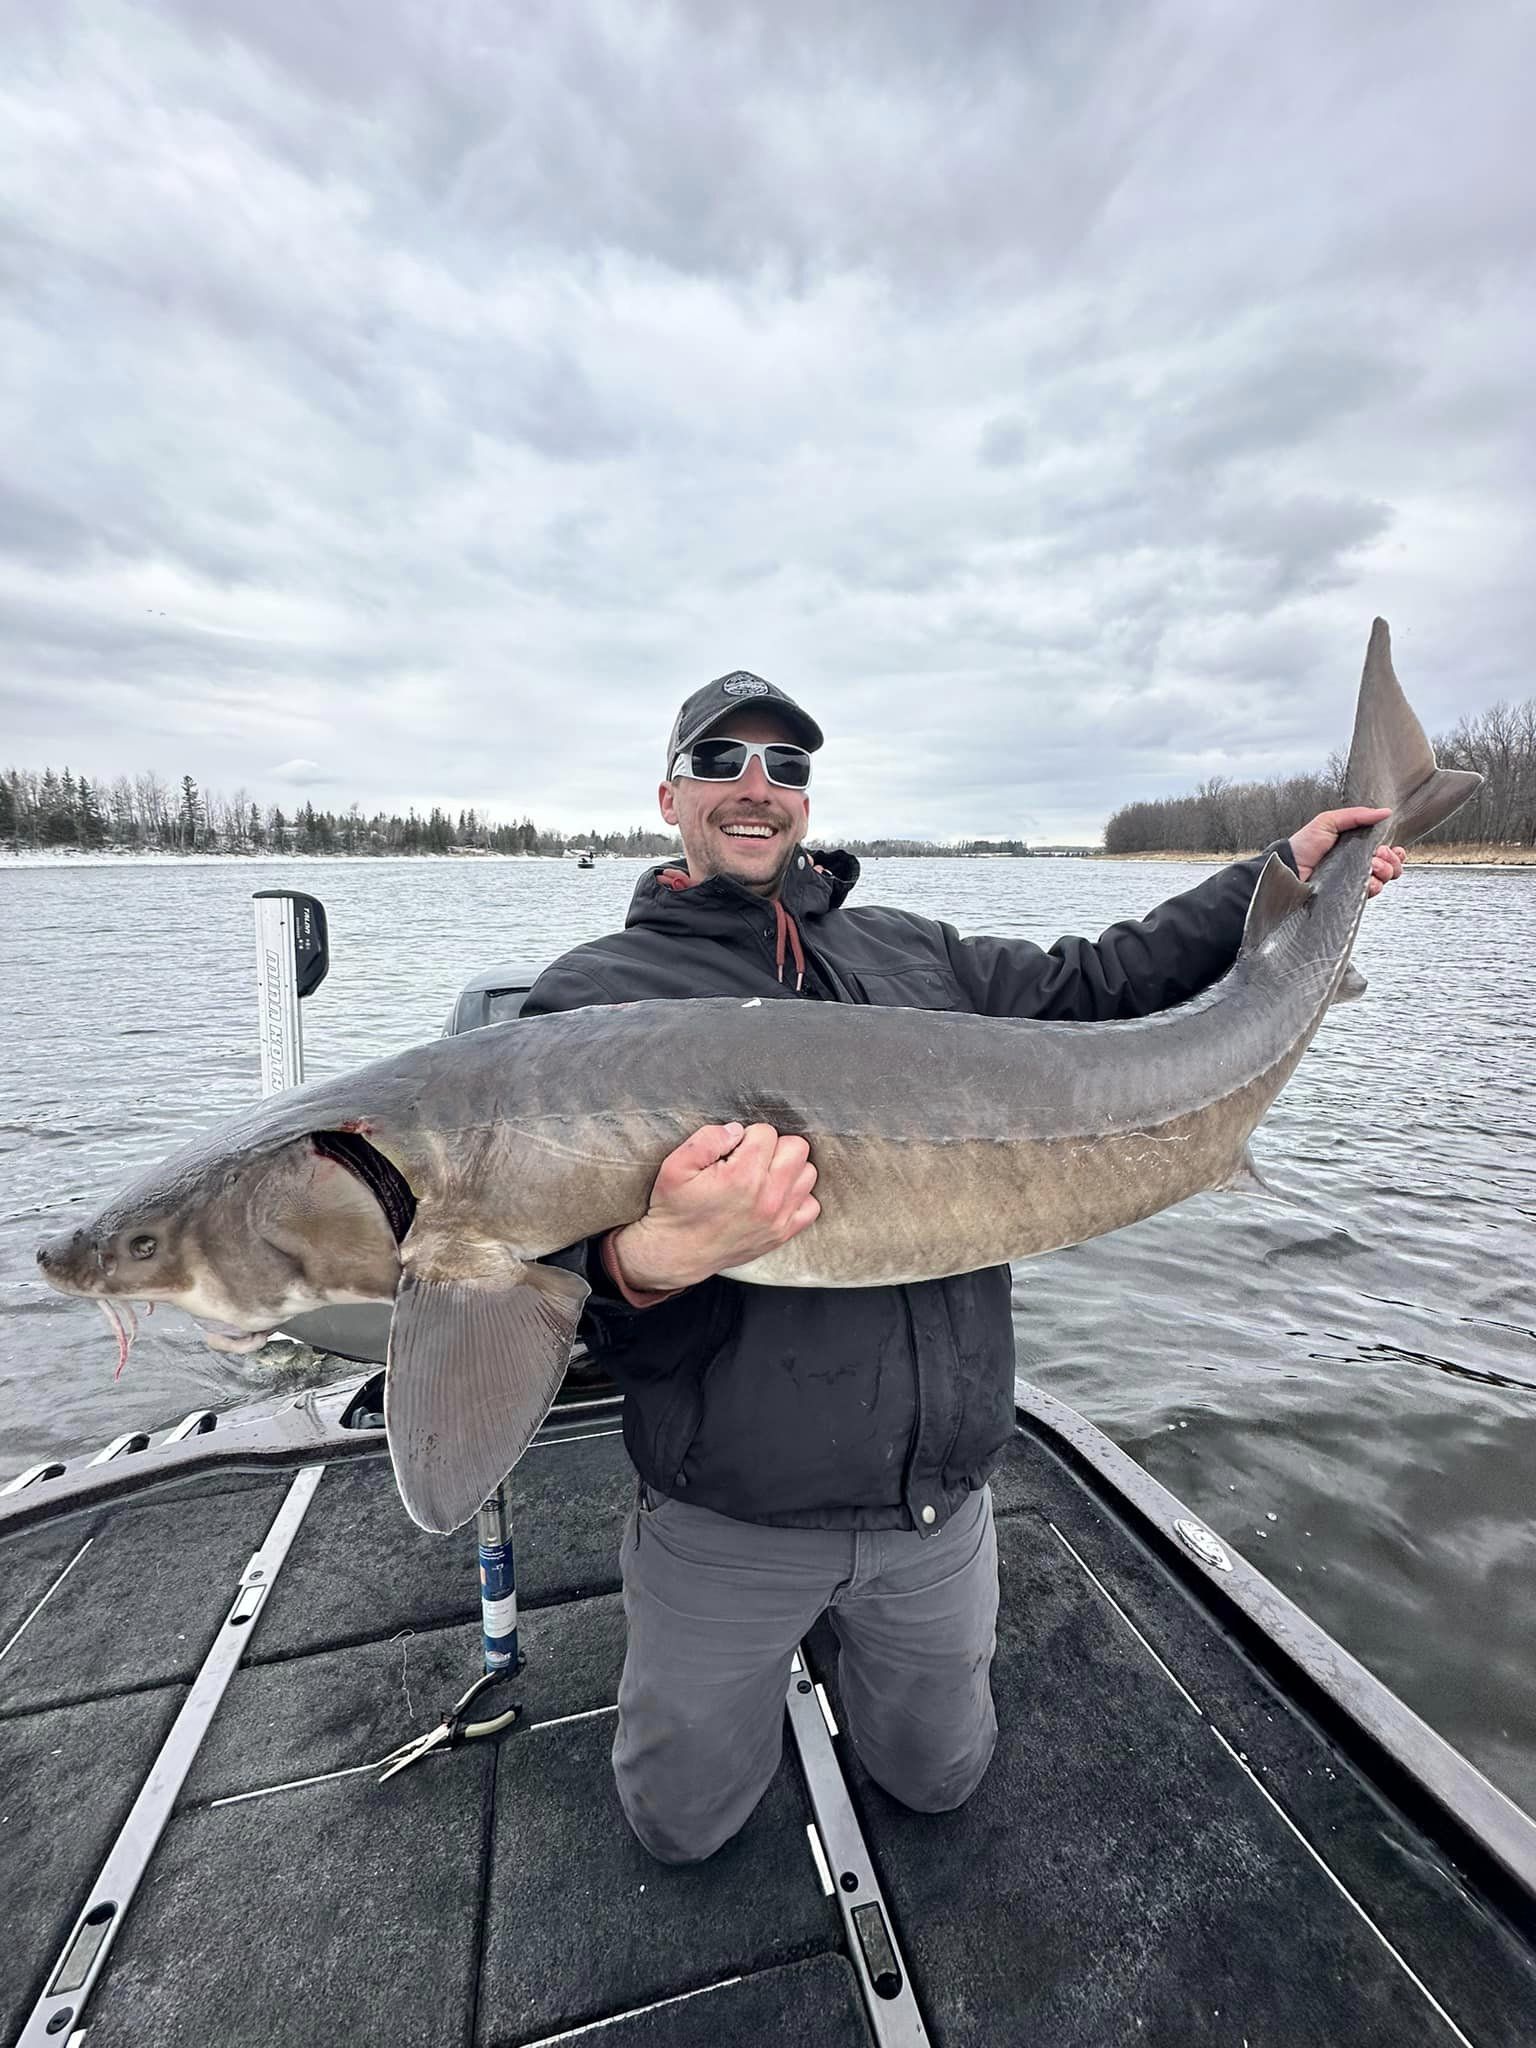 Bank fishing for Sturgeon set up - Other Fish Species - Bass Fishing Forums